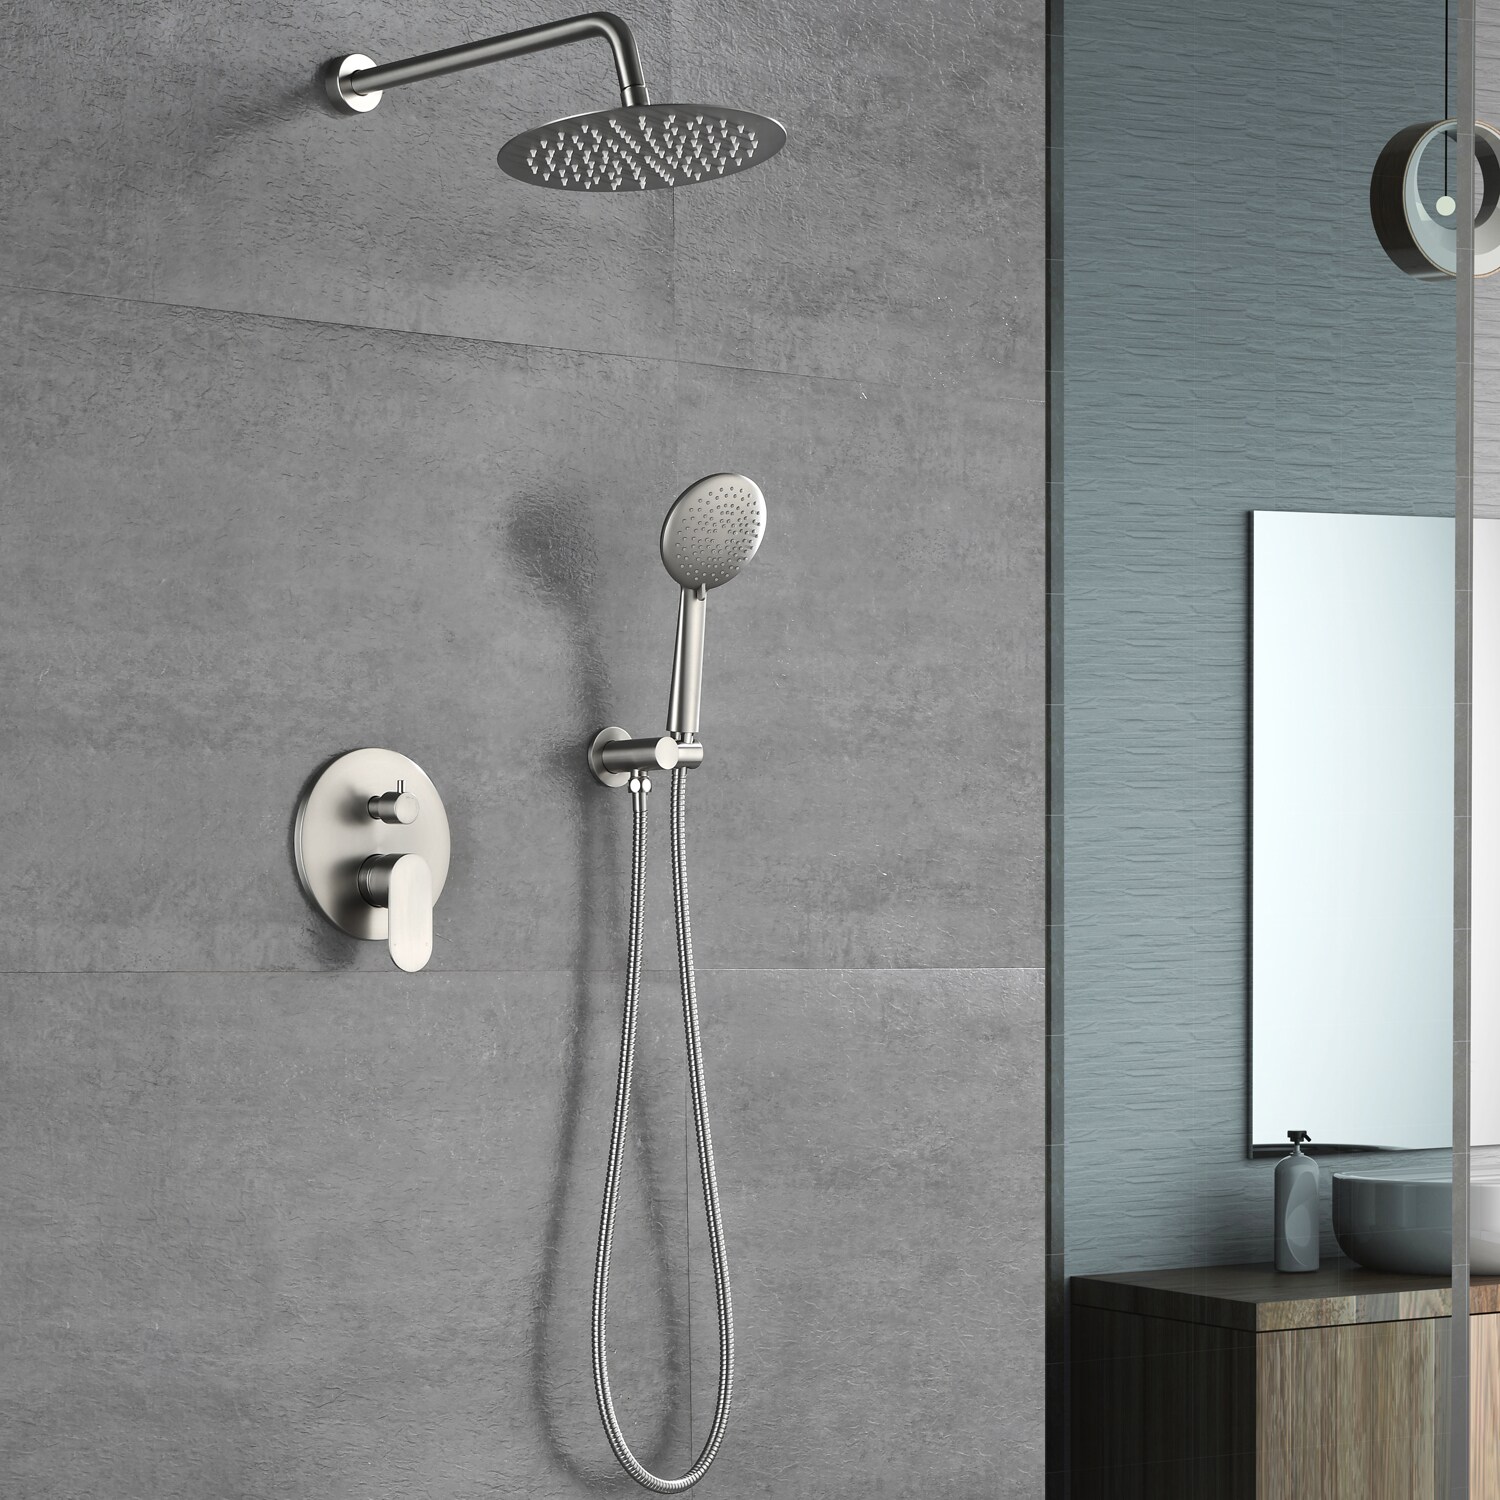 Pouuin Ob Brushed Nickel Waterfall Built-In Shower Faucet System with 2-way Diverter Valve Included